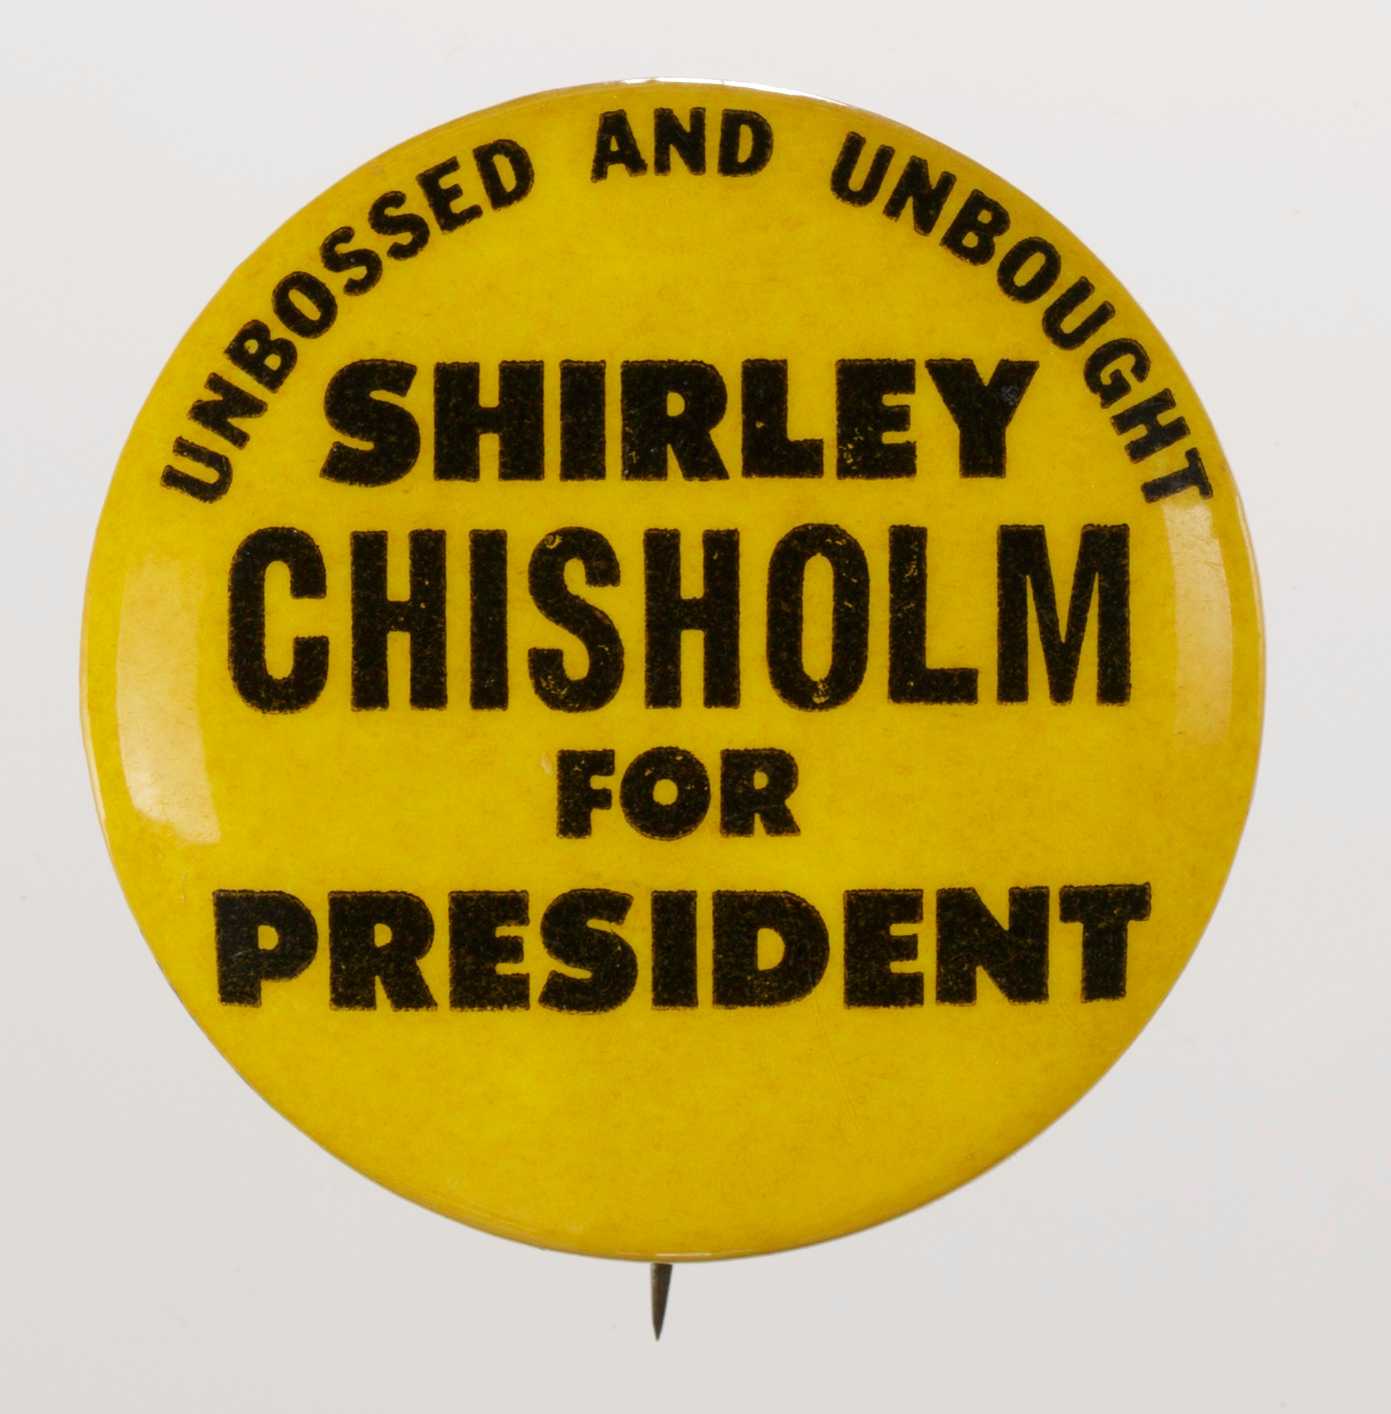 A circular metal pin-back button. It has a yellow background with black type that reads: [UNBOSSED AND UNBOUGHT / SHIRLEY / CHISHOLM / FOR / PRESIDENT]. The fonts vary in size. Black type, around the edge of the pin reads:  [LARRY FOX ASSOC. P.O. BOX 581 HEMPSTEAD NEW YORK]. The back of the button is silver in color, has a single pin without a clasp and an engraving.